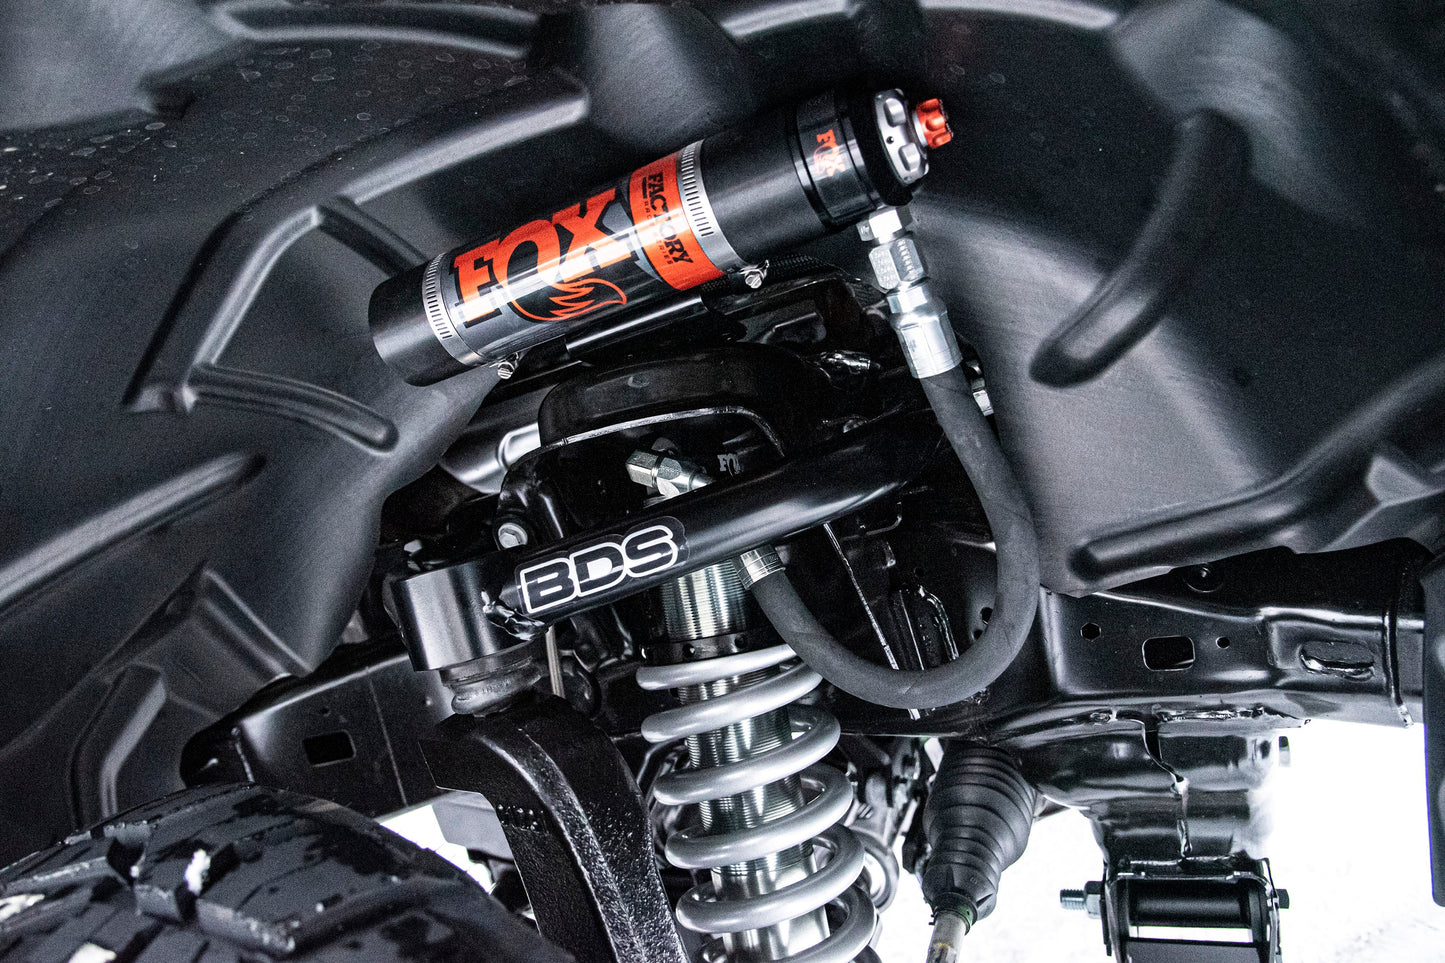 4 Inch Lift Kit | FOX 2.5 Performance Elite Coil-Over | Ram 1500 (19-23) 4WD (Standard Knuckle)